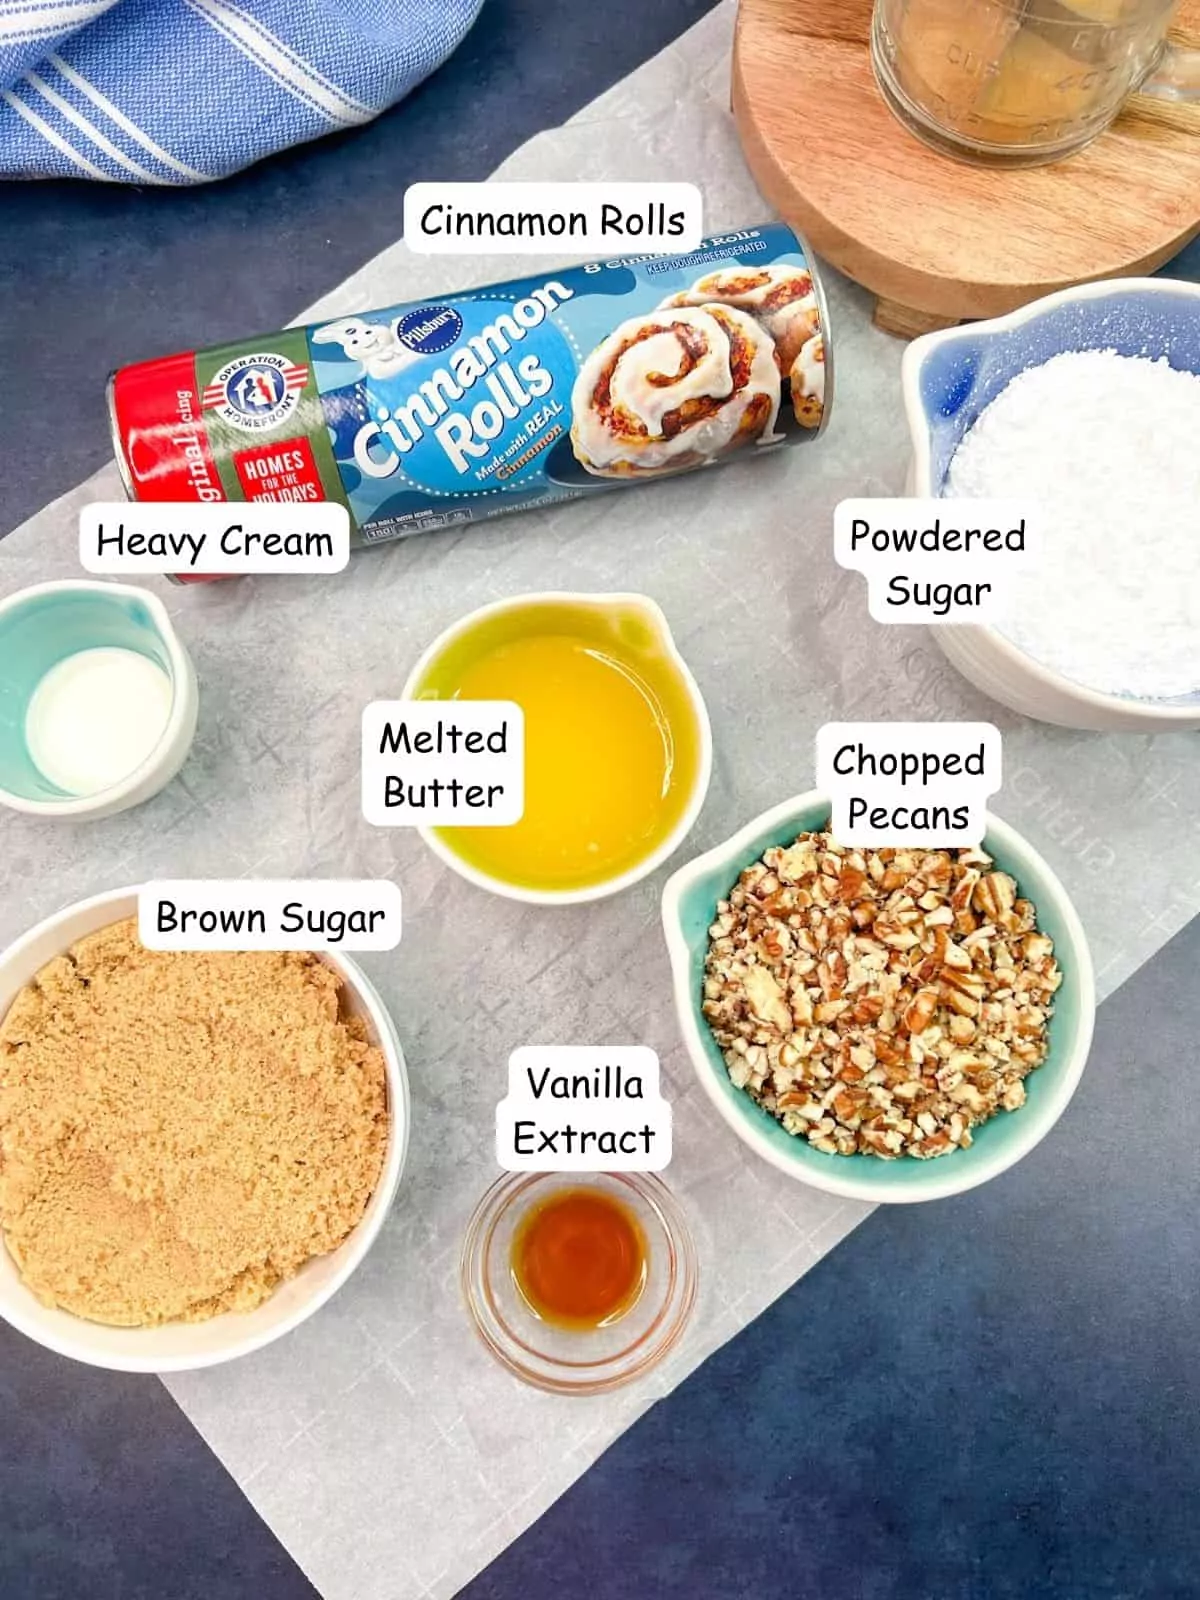 Ingredients for Pecan Rolls from Canned Cinnamon Rolls.